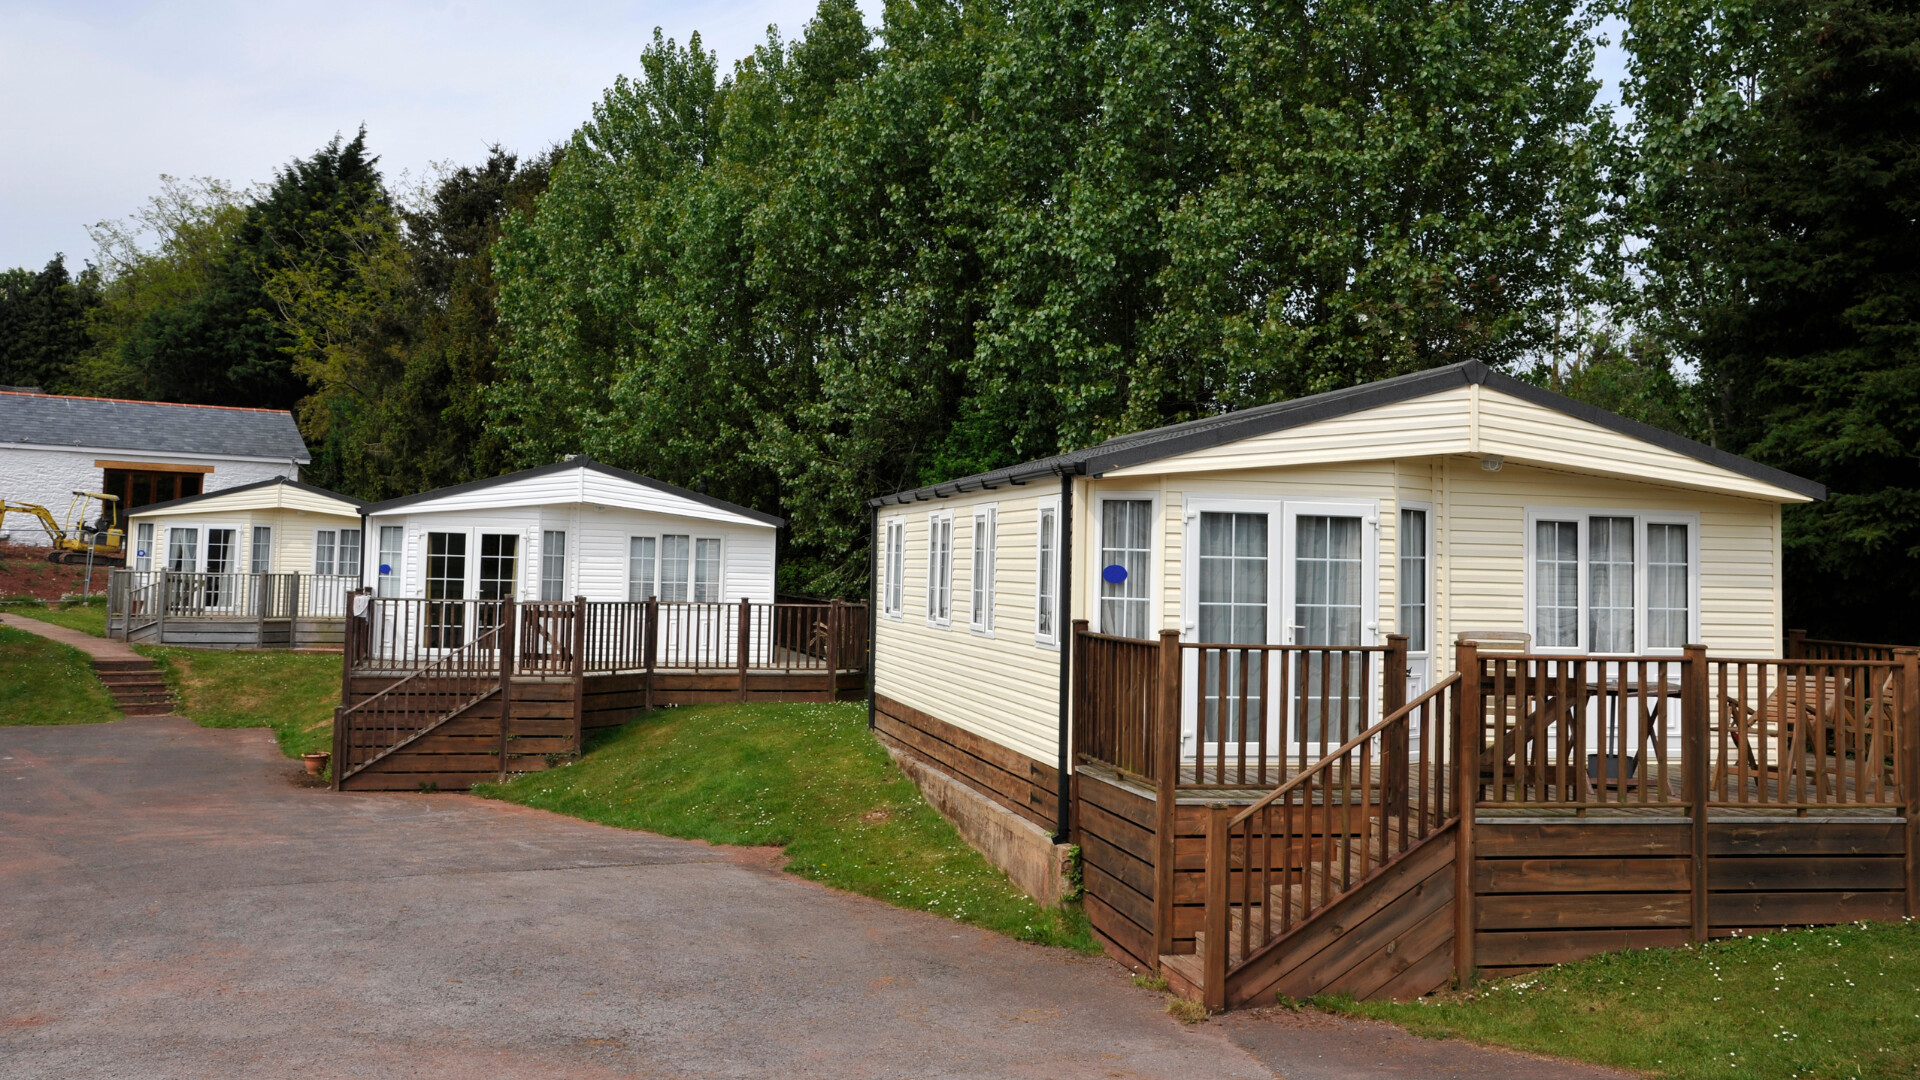 Top 5 Mobile Home Park Liability Risks You Need to Know